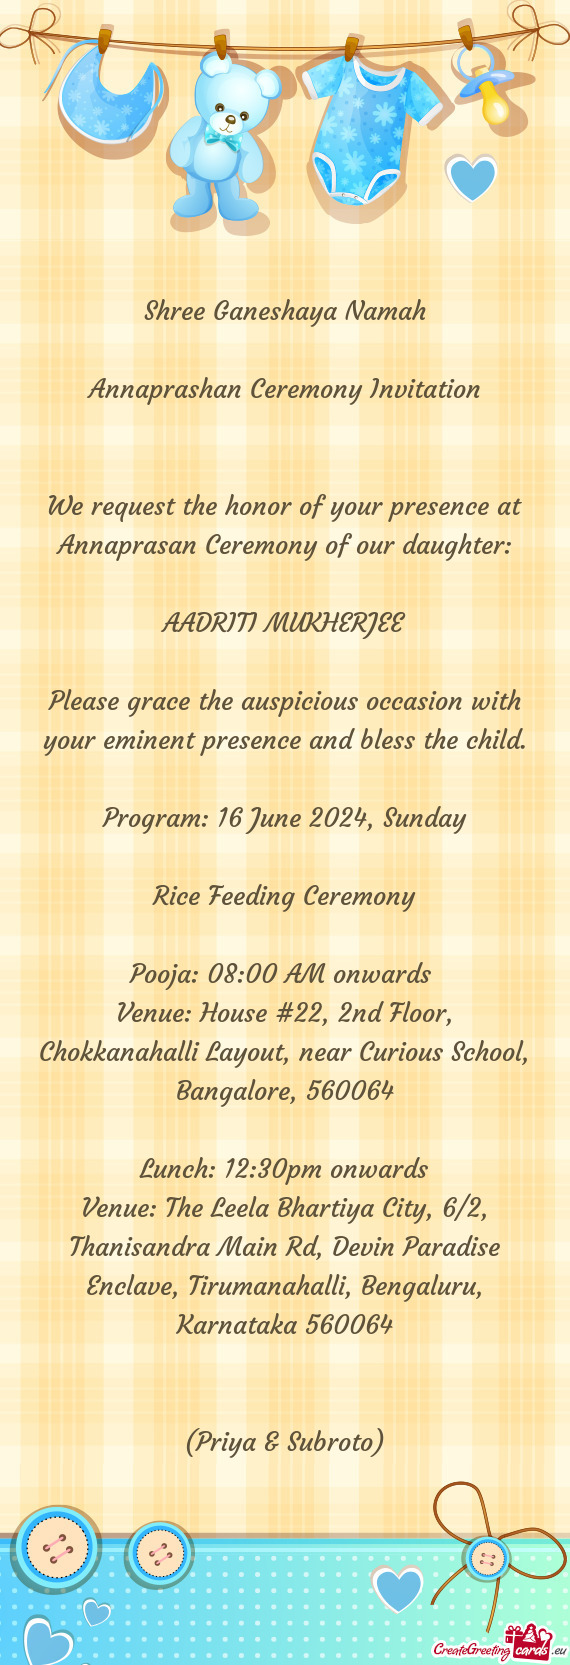 We request the honor of your presence at Annaprasan Ceremony of our daughter